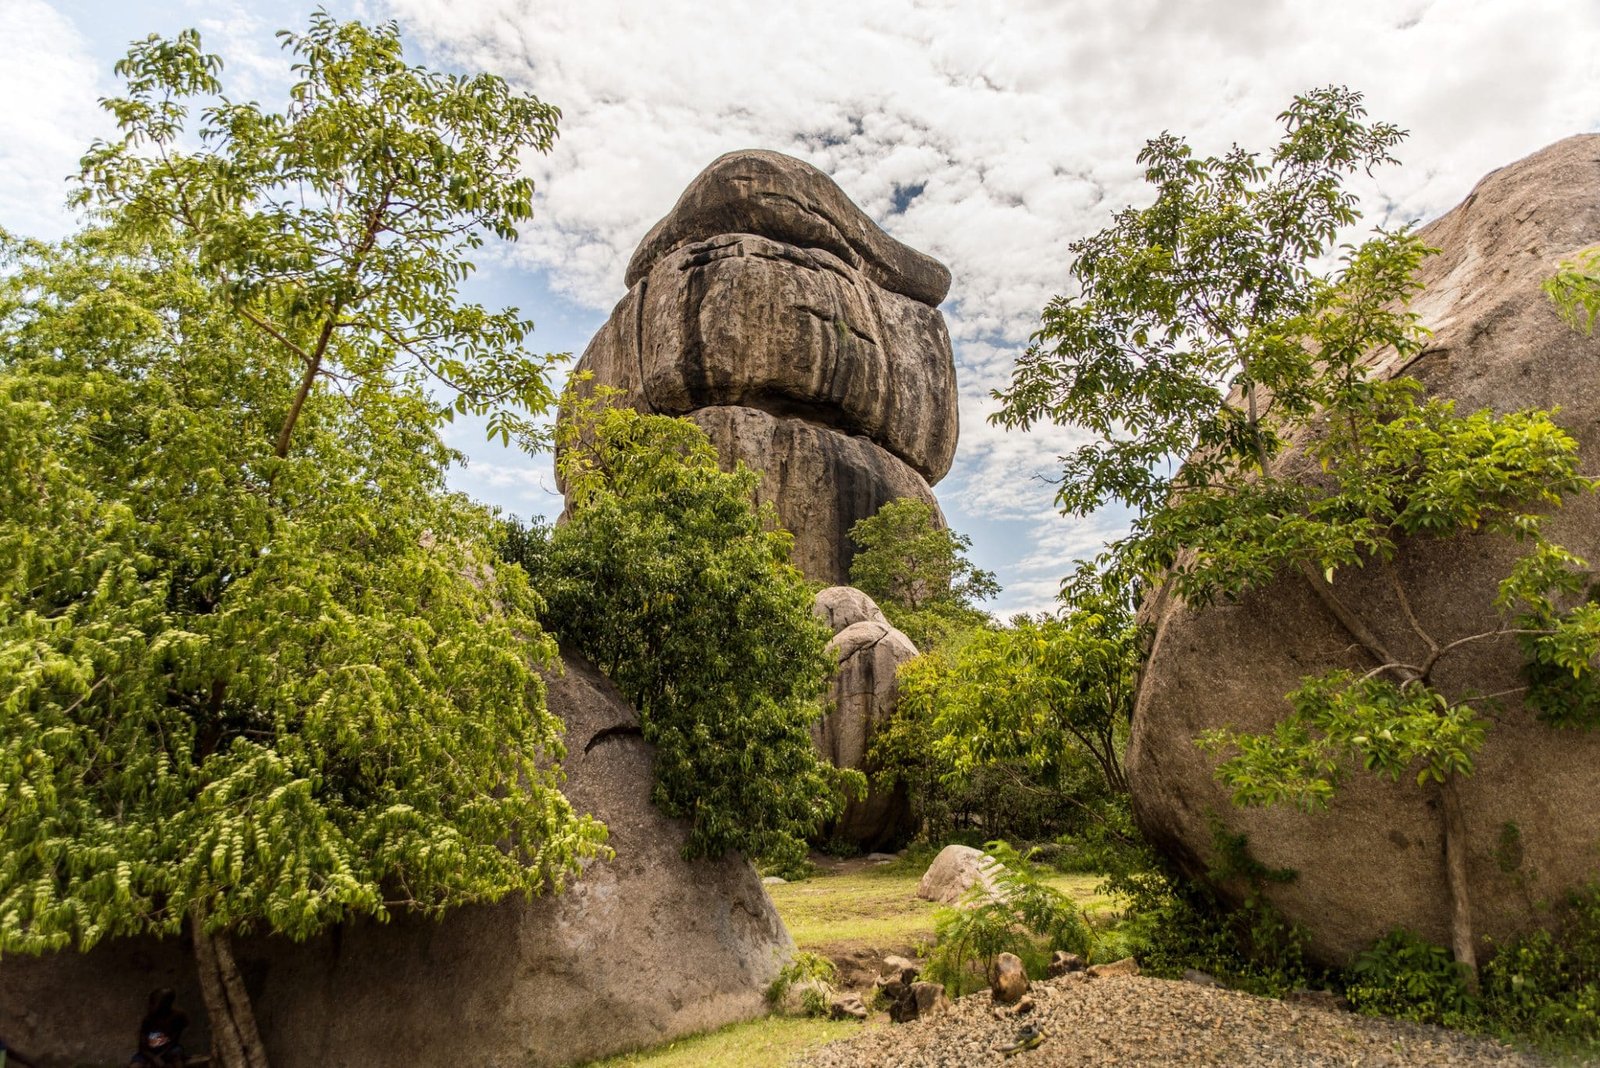 Kit Mikayi is a rock formation or tor, around 40 m high, in Seme, Kisumu County, western Kenya, Africa. Kit Mikayi, which means ‘stones of the first wife’ or ‘‘First wife’s rocks’’, in Dholuo, the local language, is both a spiritual place for the local Luo people and a tourist attraction.